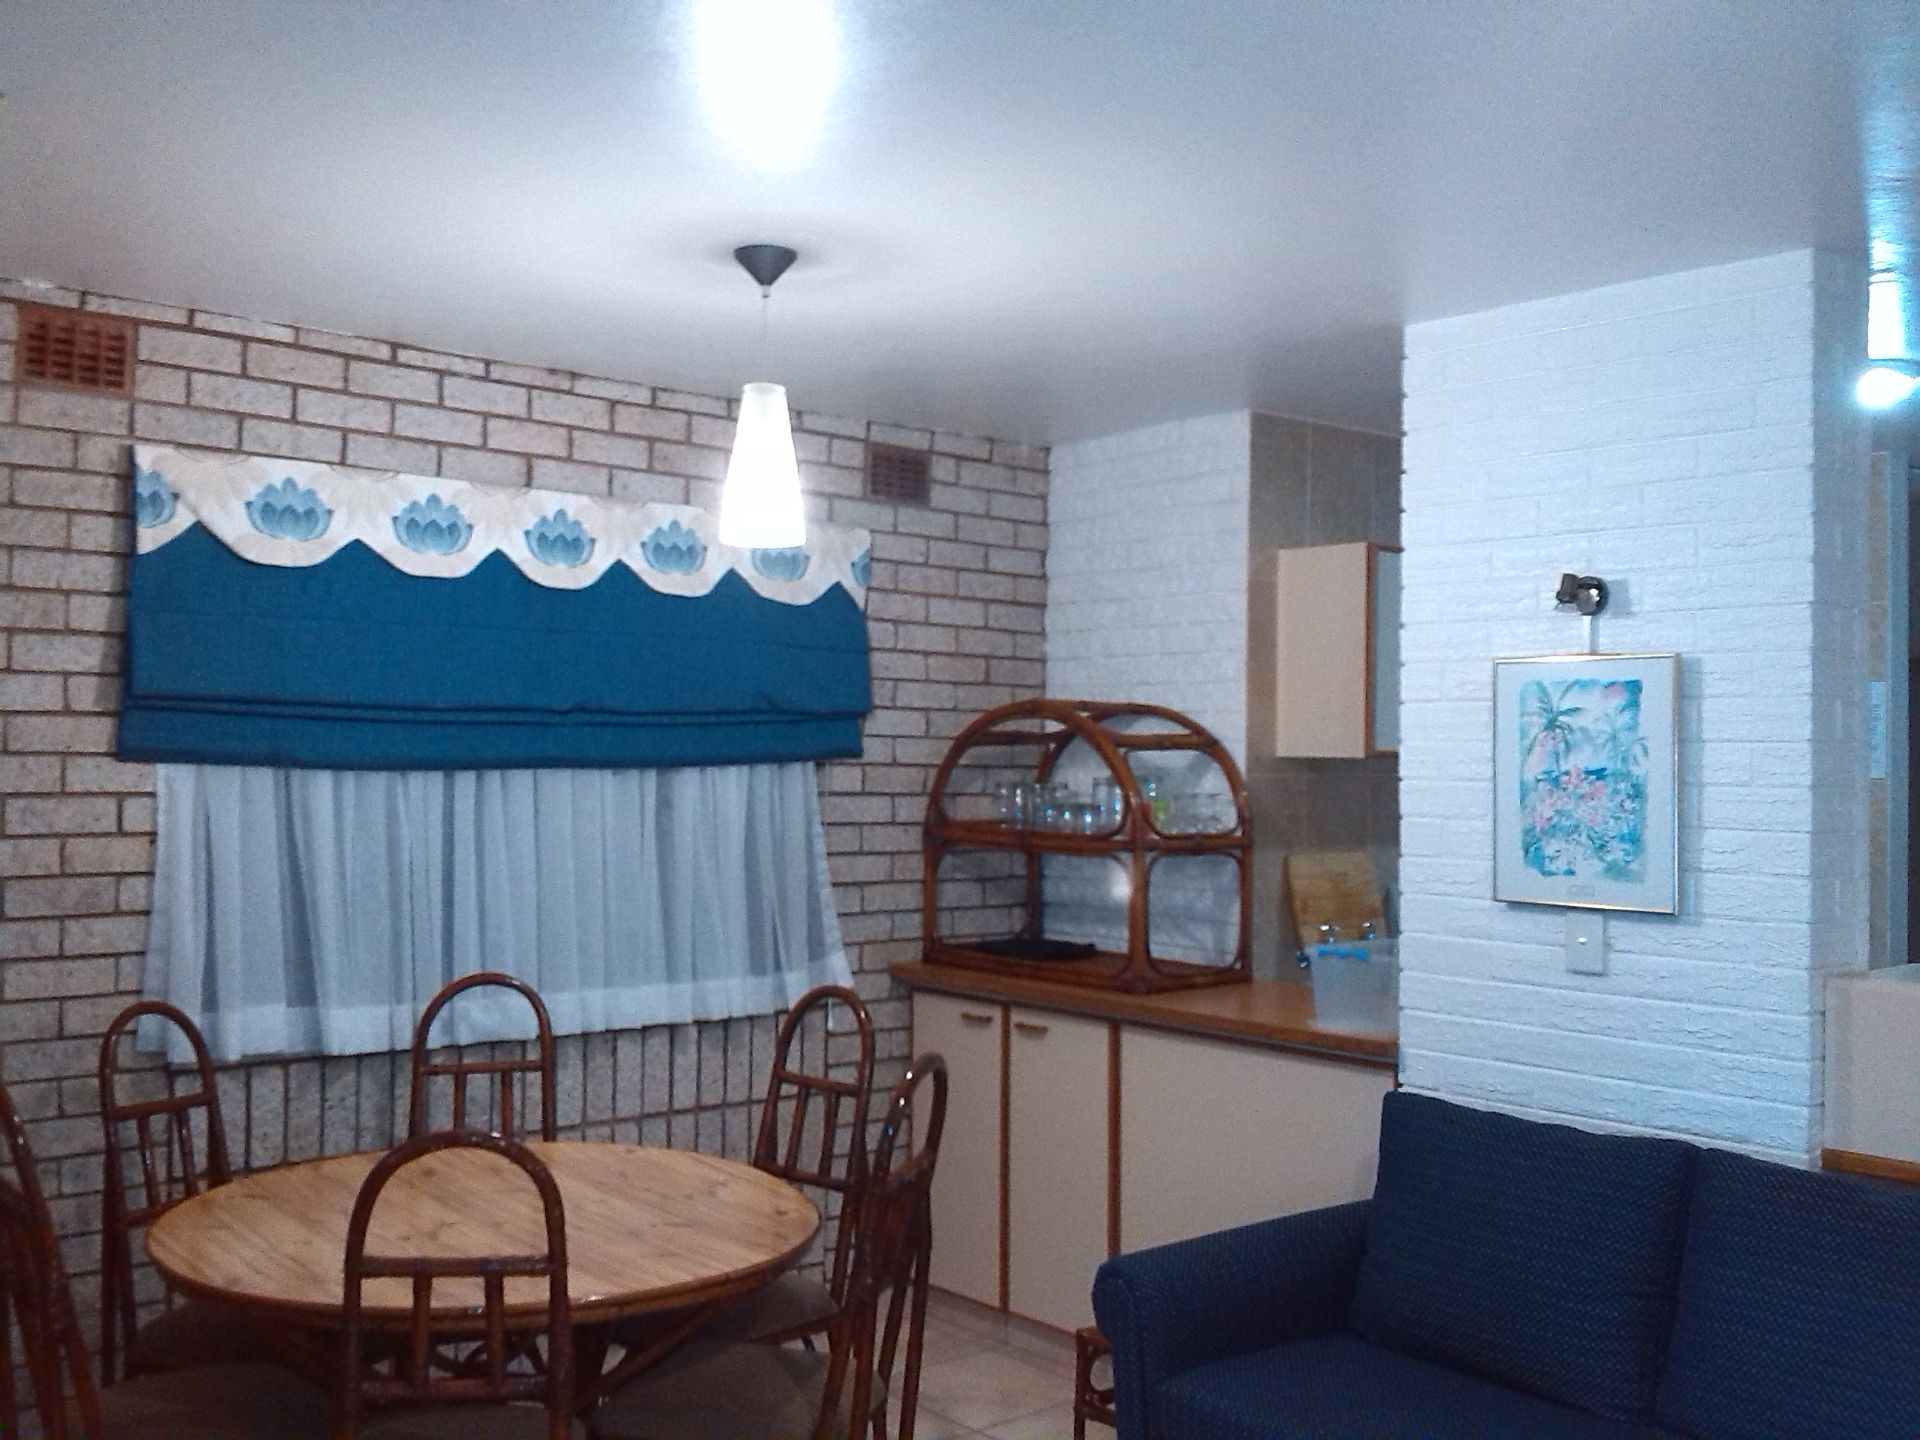 Pearly Shells - 2 Beds (6 Sleepers Max) . Date - 22/07/2016 - 29/07/2016 - (Shareblock) - Image 14 of 32